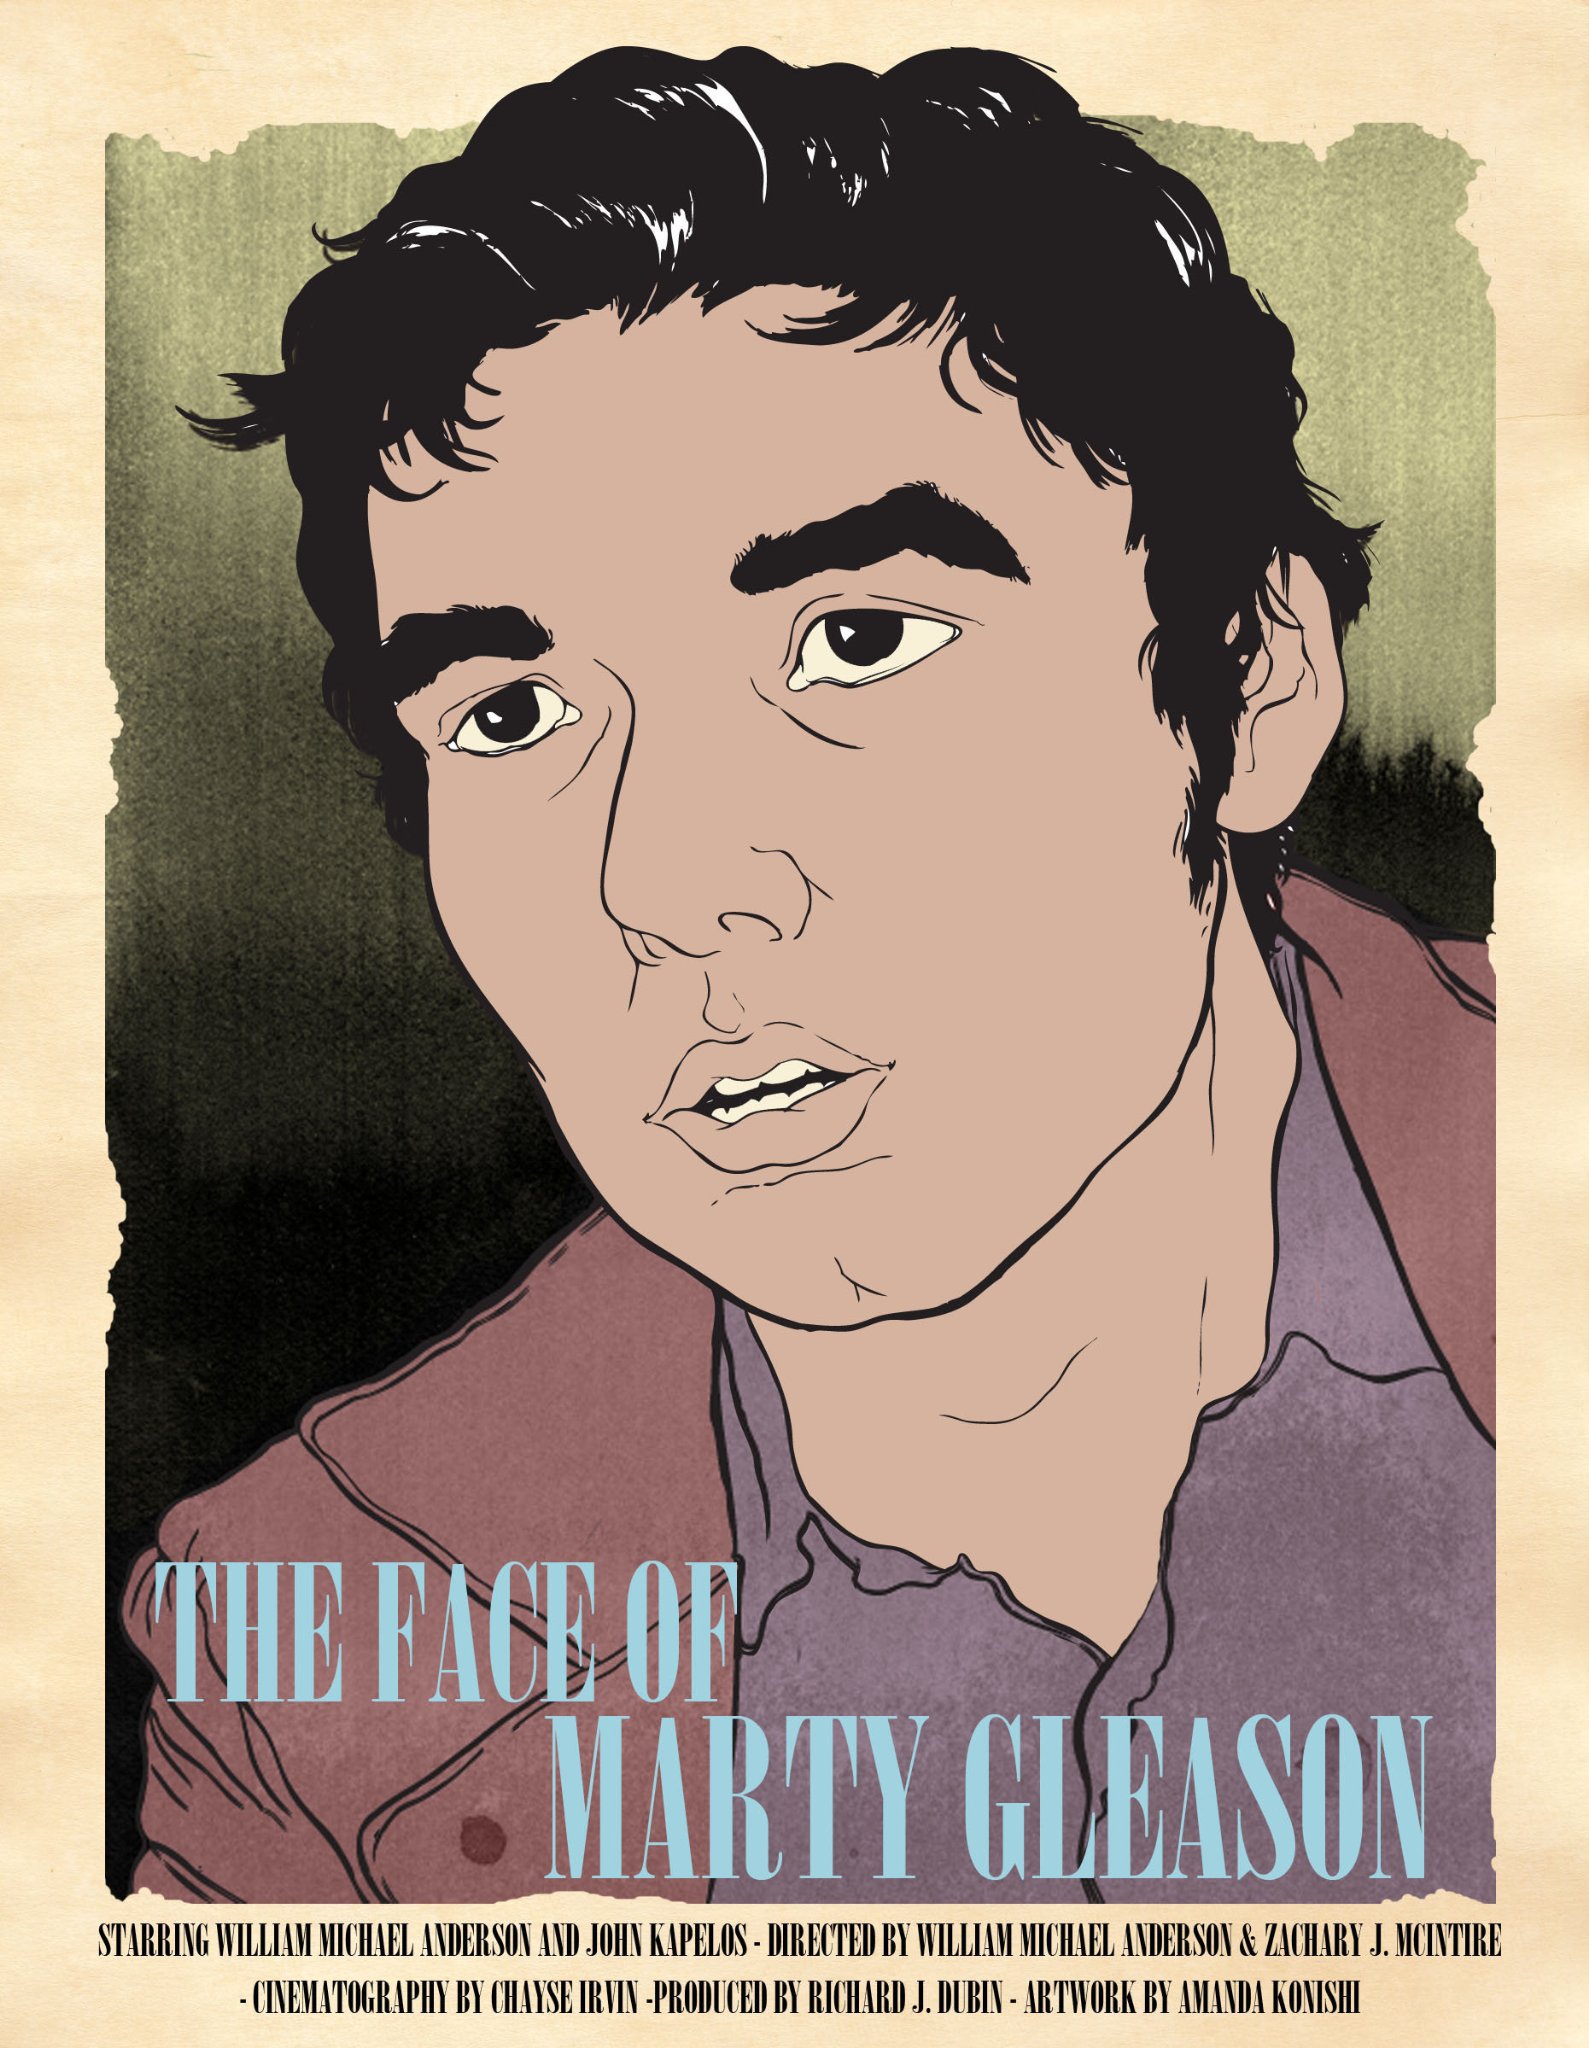 Фото - The Face of Marty Gleason: 1589x2048 / 425 Кб